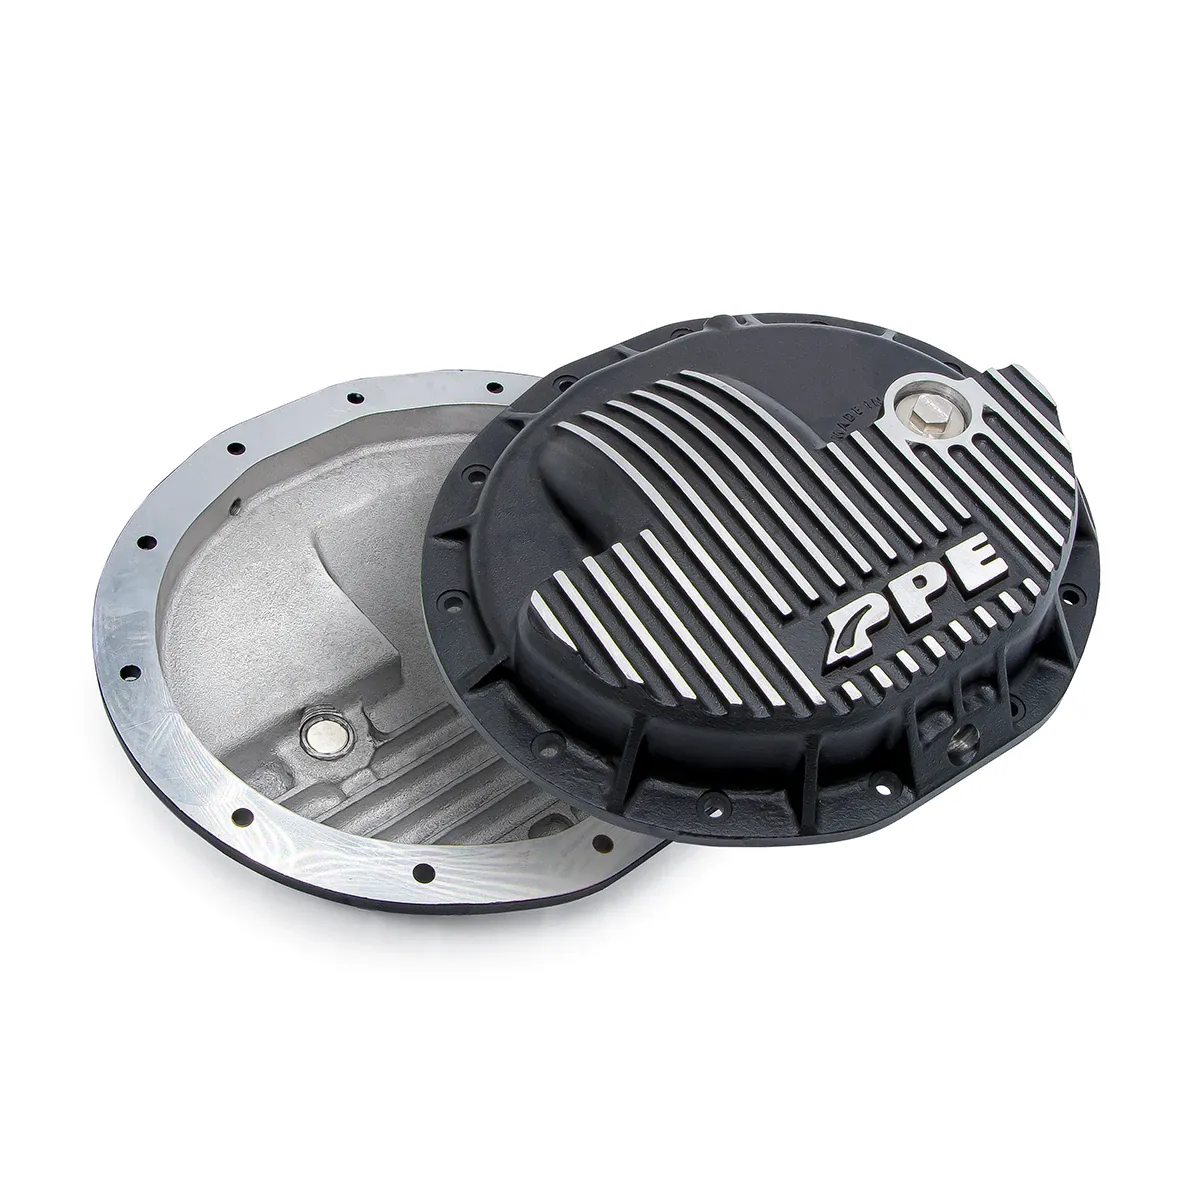 PPE - PPE Brushed Heavy Duty Aluminum Front Differential Cover For 15-18 Ram 2500/3500